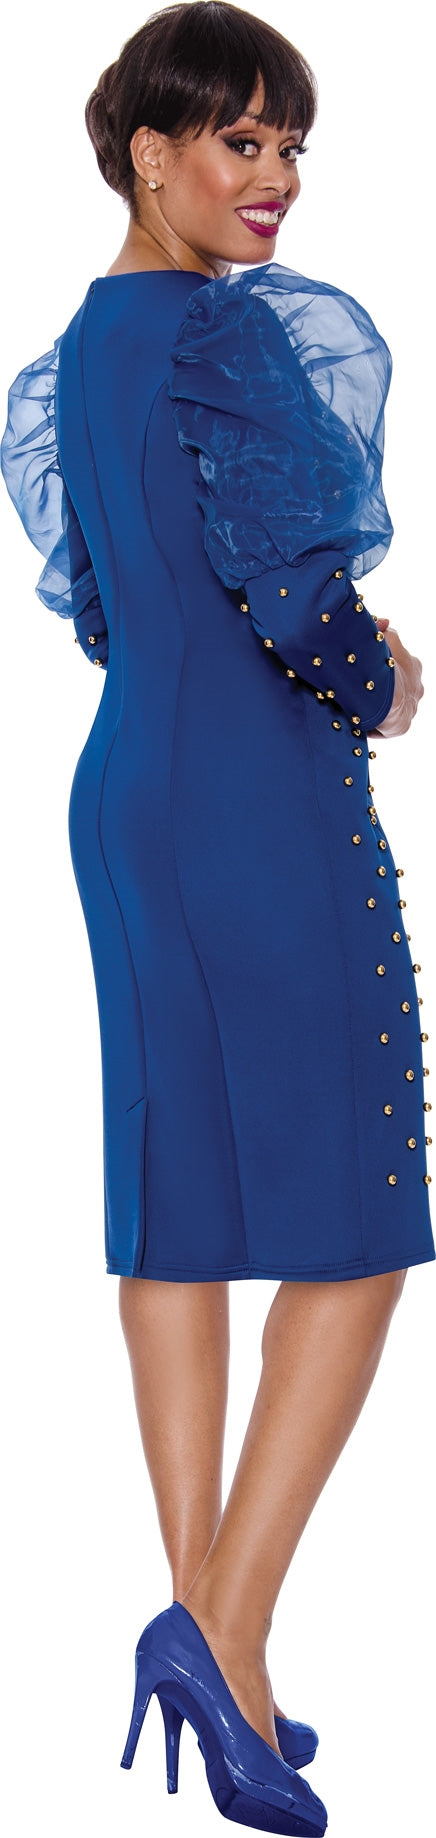 Stellar Looks Dress 1791-Royal Blue - Church Suits For Less